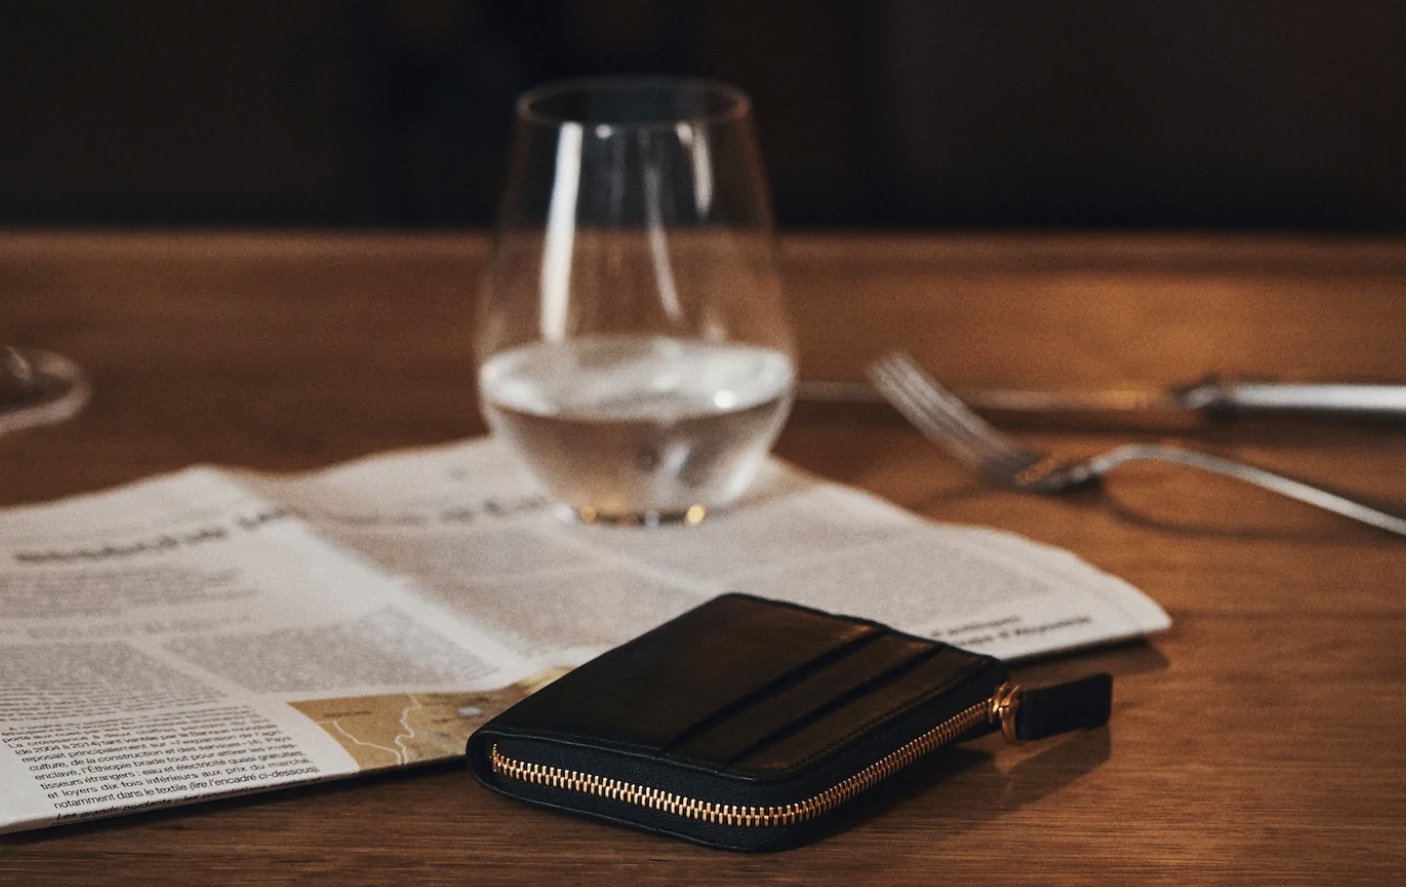 10 Best Slim Wallets For Men: Thin And Compact Styles in 2023